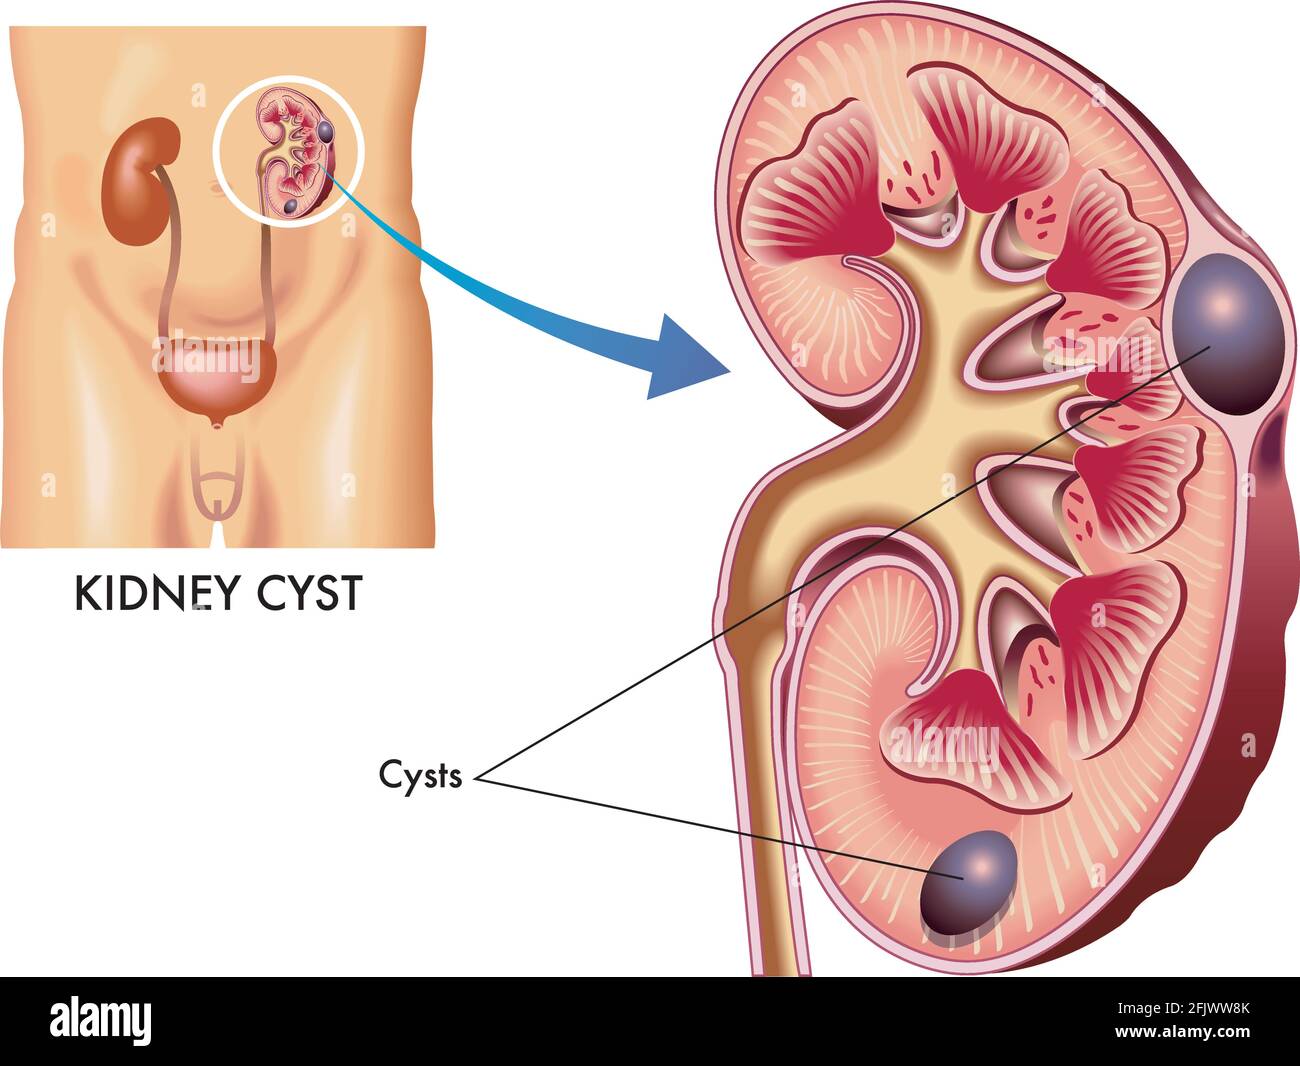 Medical illustration of a kidney with some cysts. Stock Vector